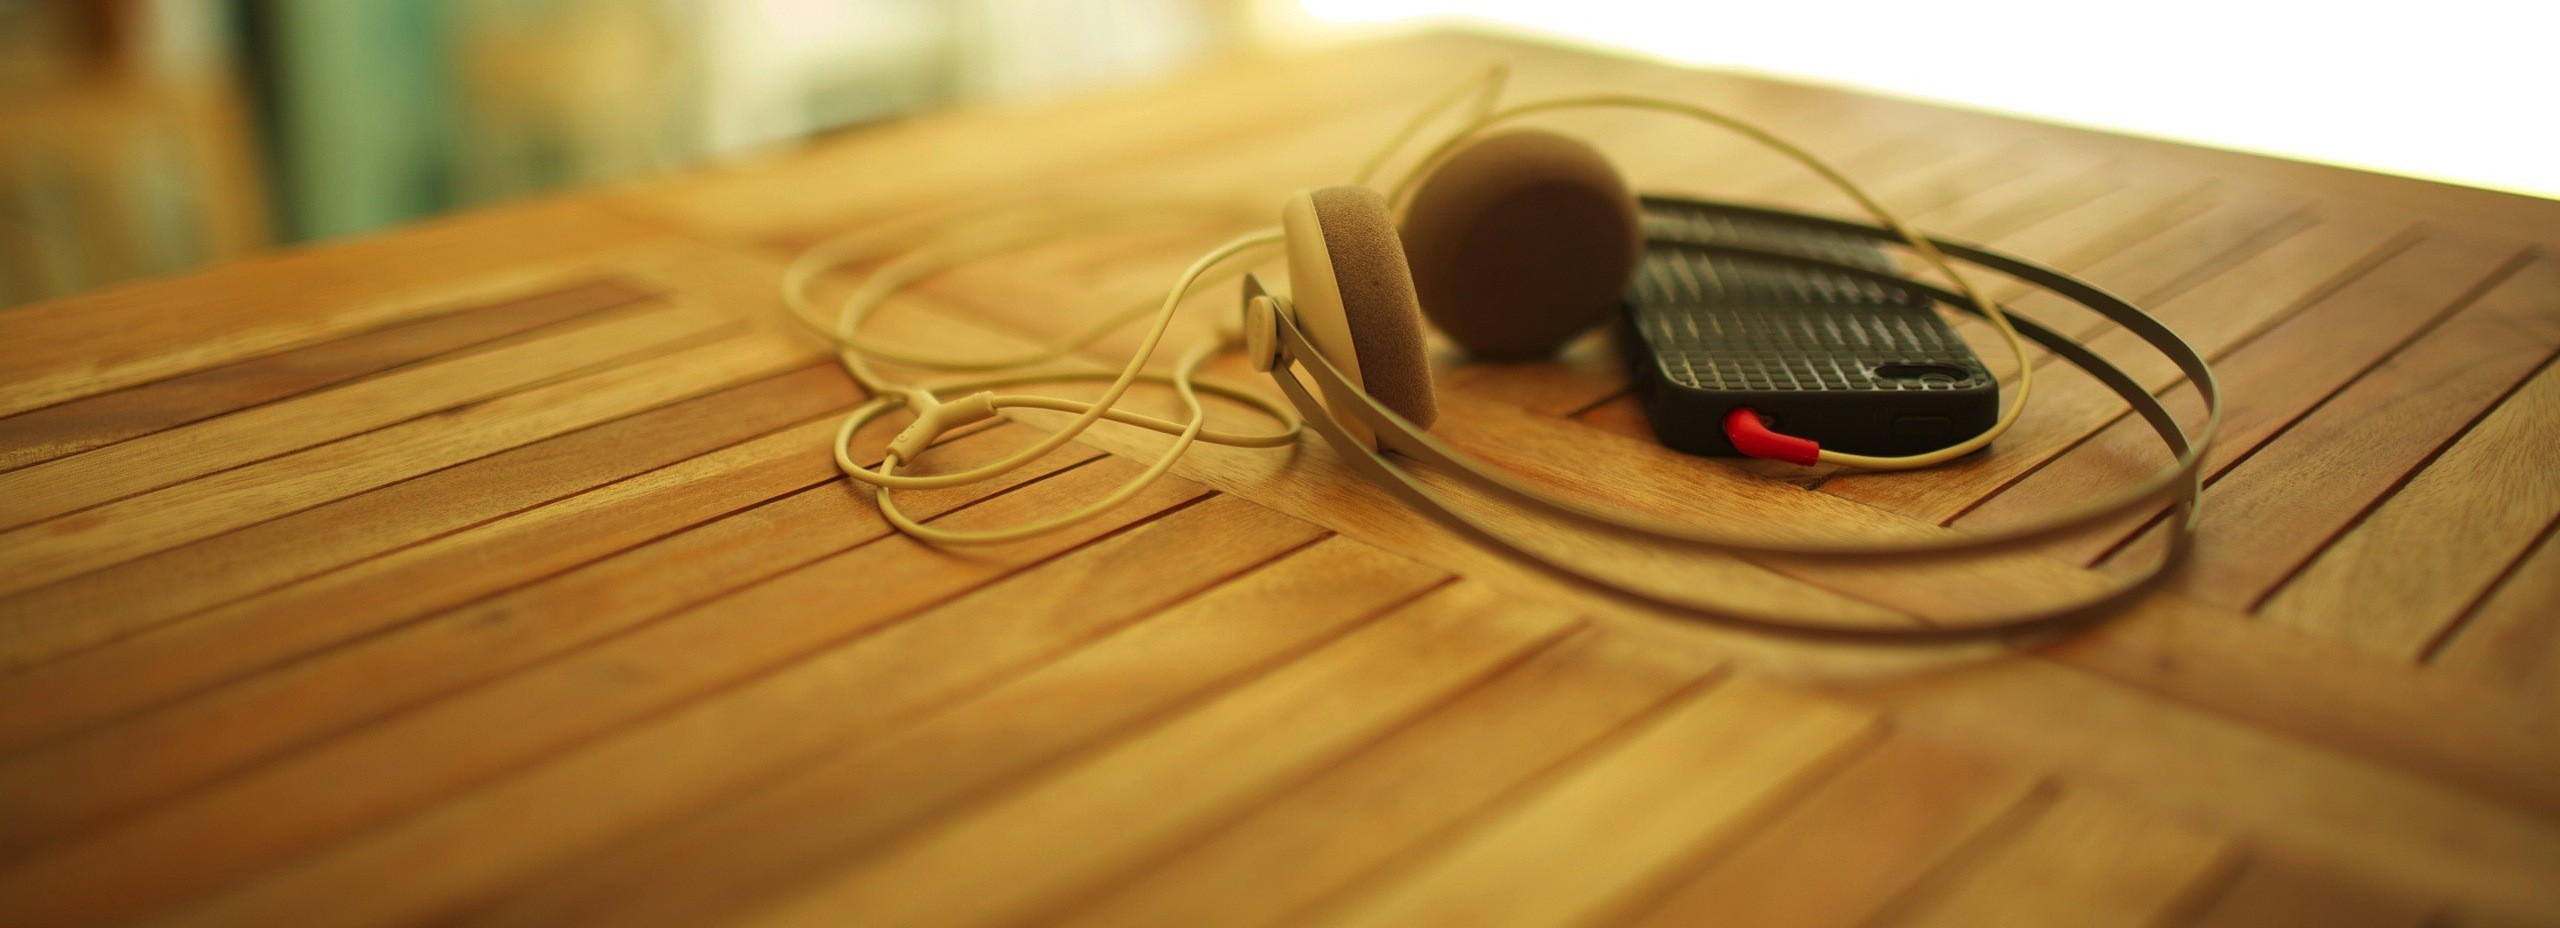 General 2560x928 wooden surface technology blurred macro headphones